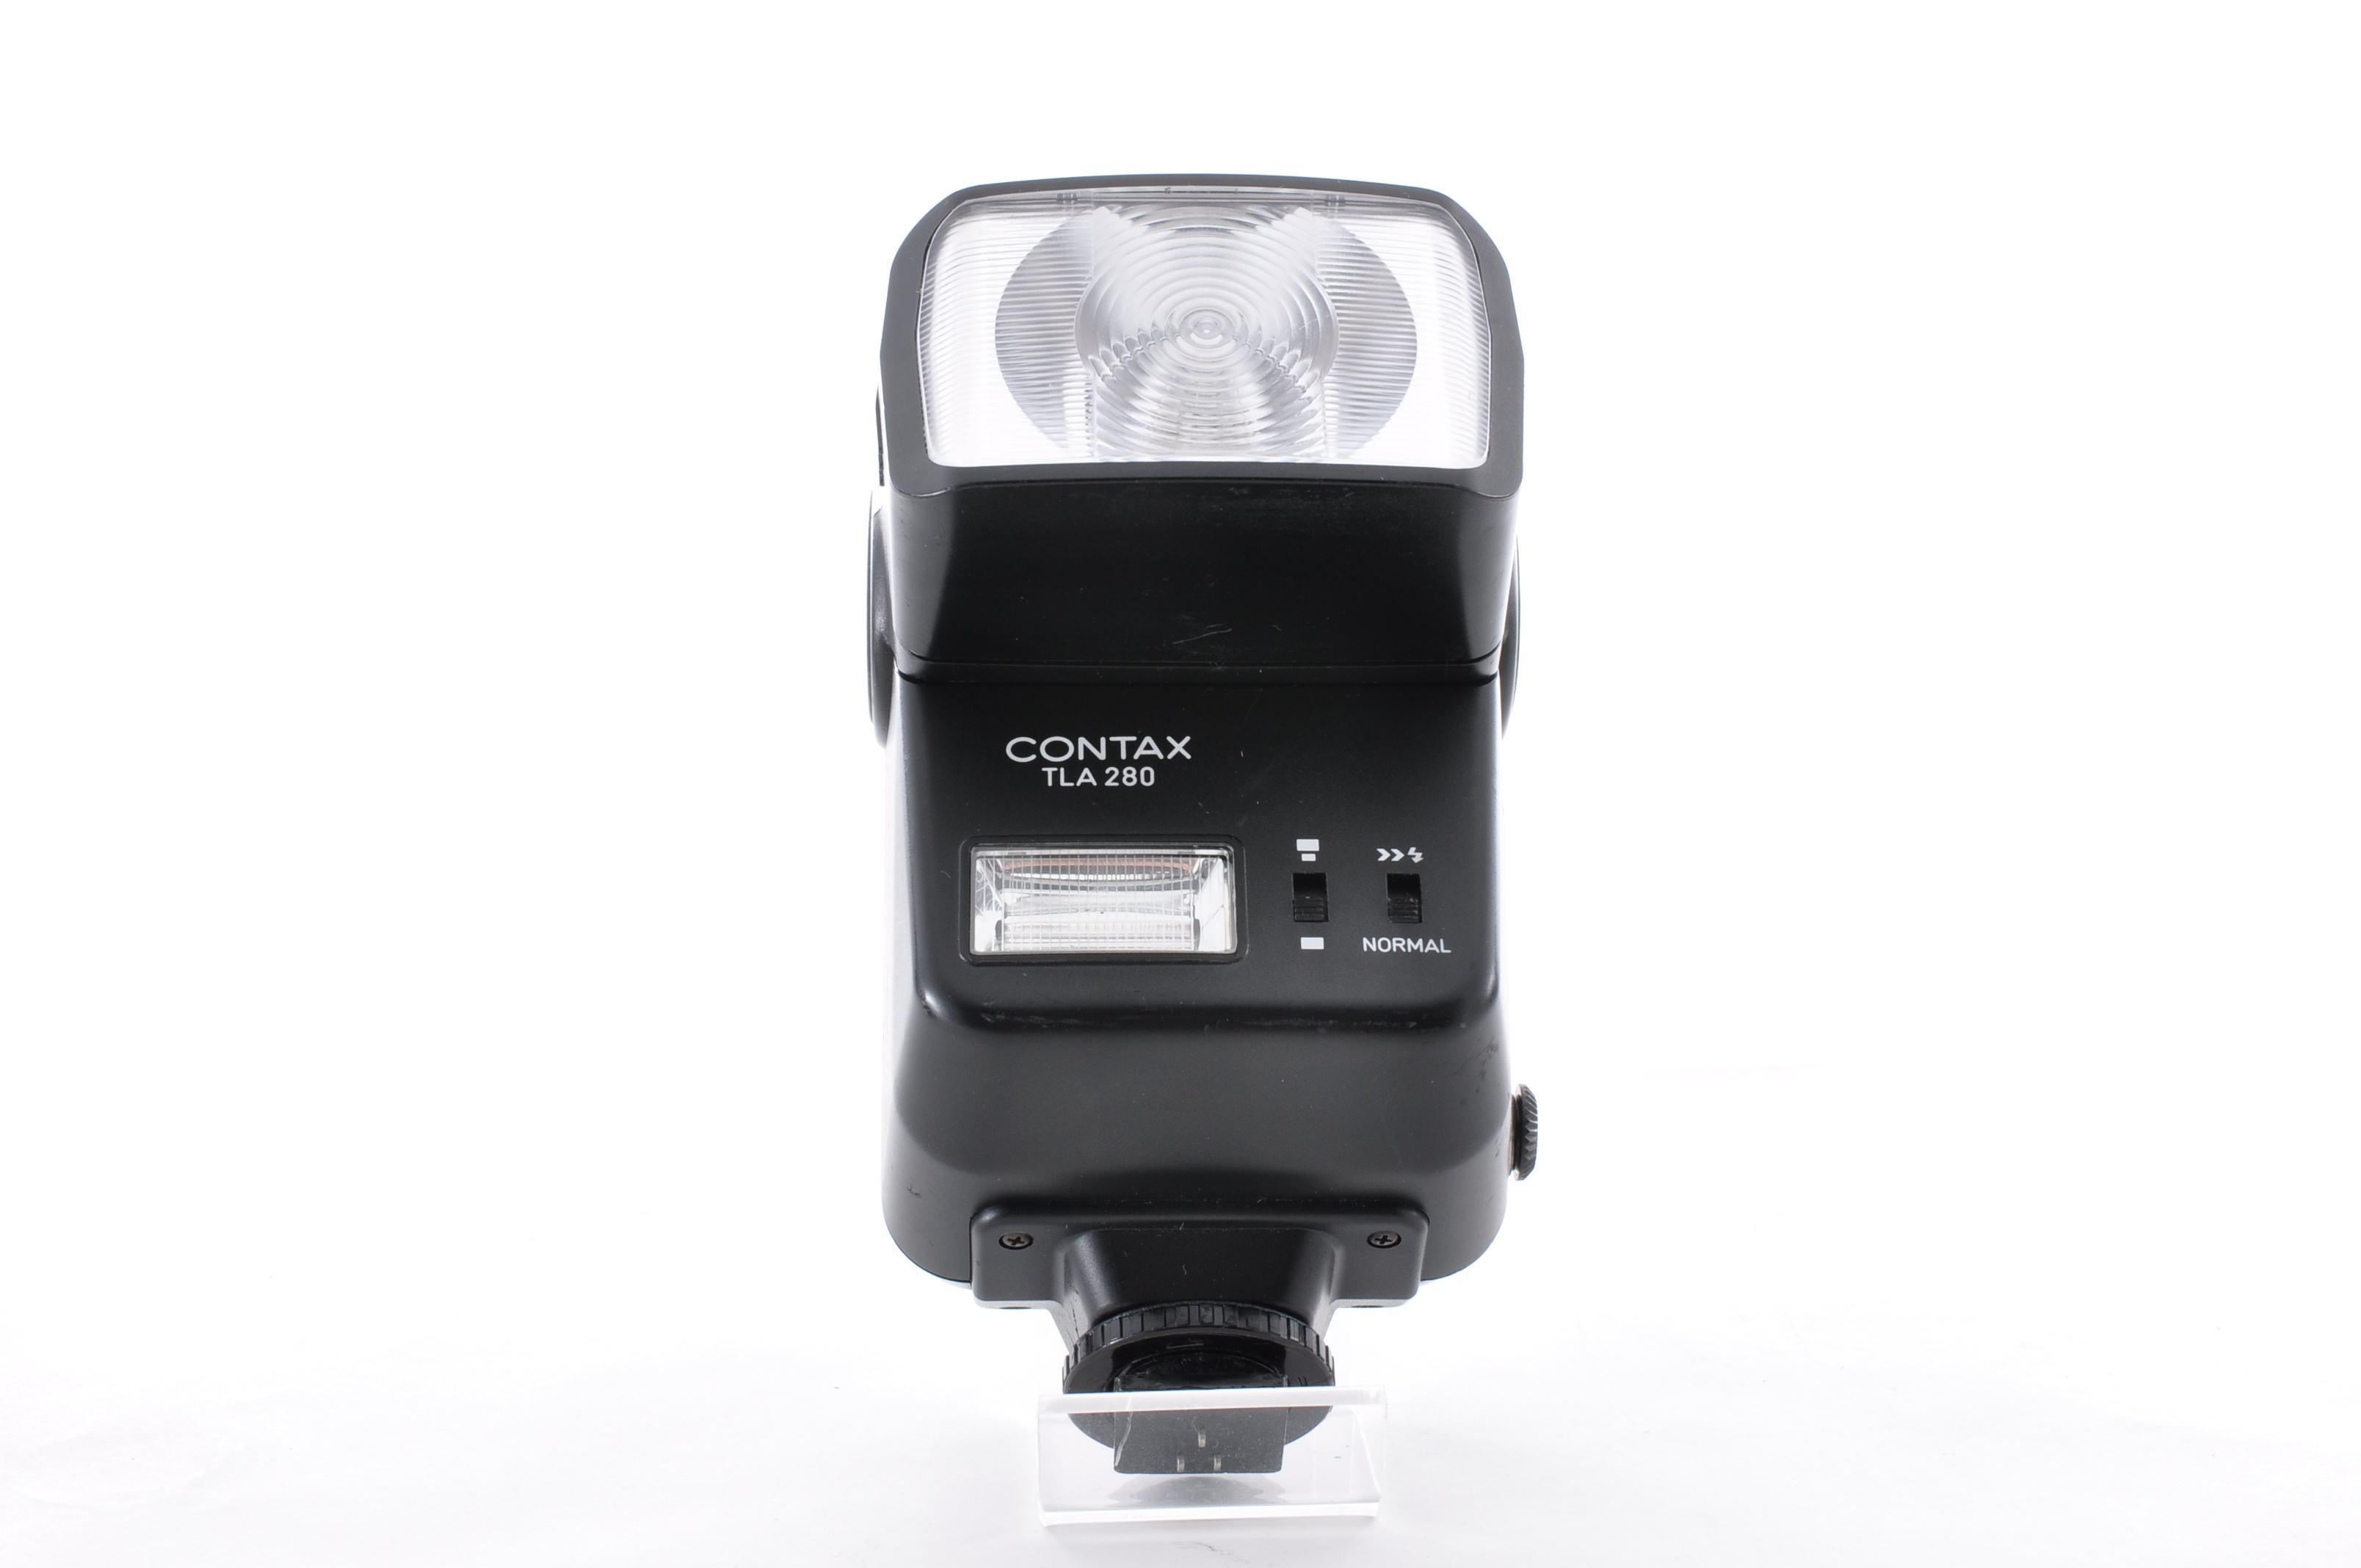 [Excellent] Contax TLA 280 Shoe Mount Flash For Contax SLR From Japan img13